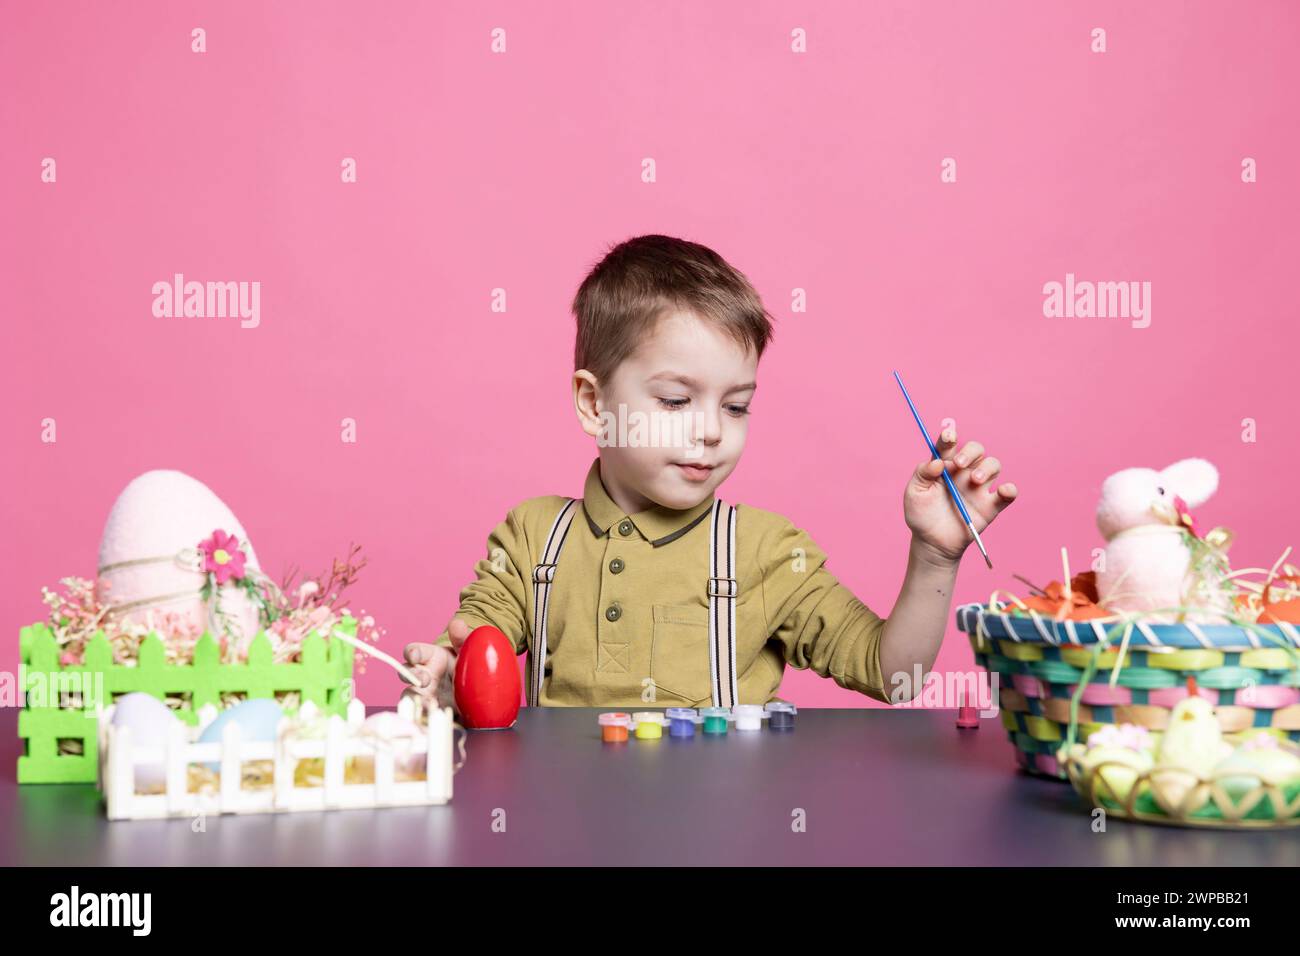 Lovely youngster with a smile crafting eggs and decorations for the Easter festivities, using art supplies and watercolor paint. Little pleased boy feeling excited about painting activity. Stock Photo